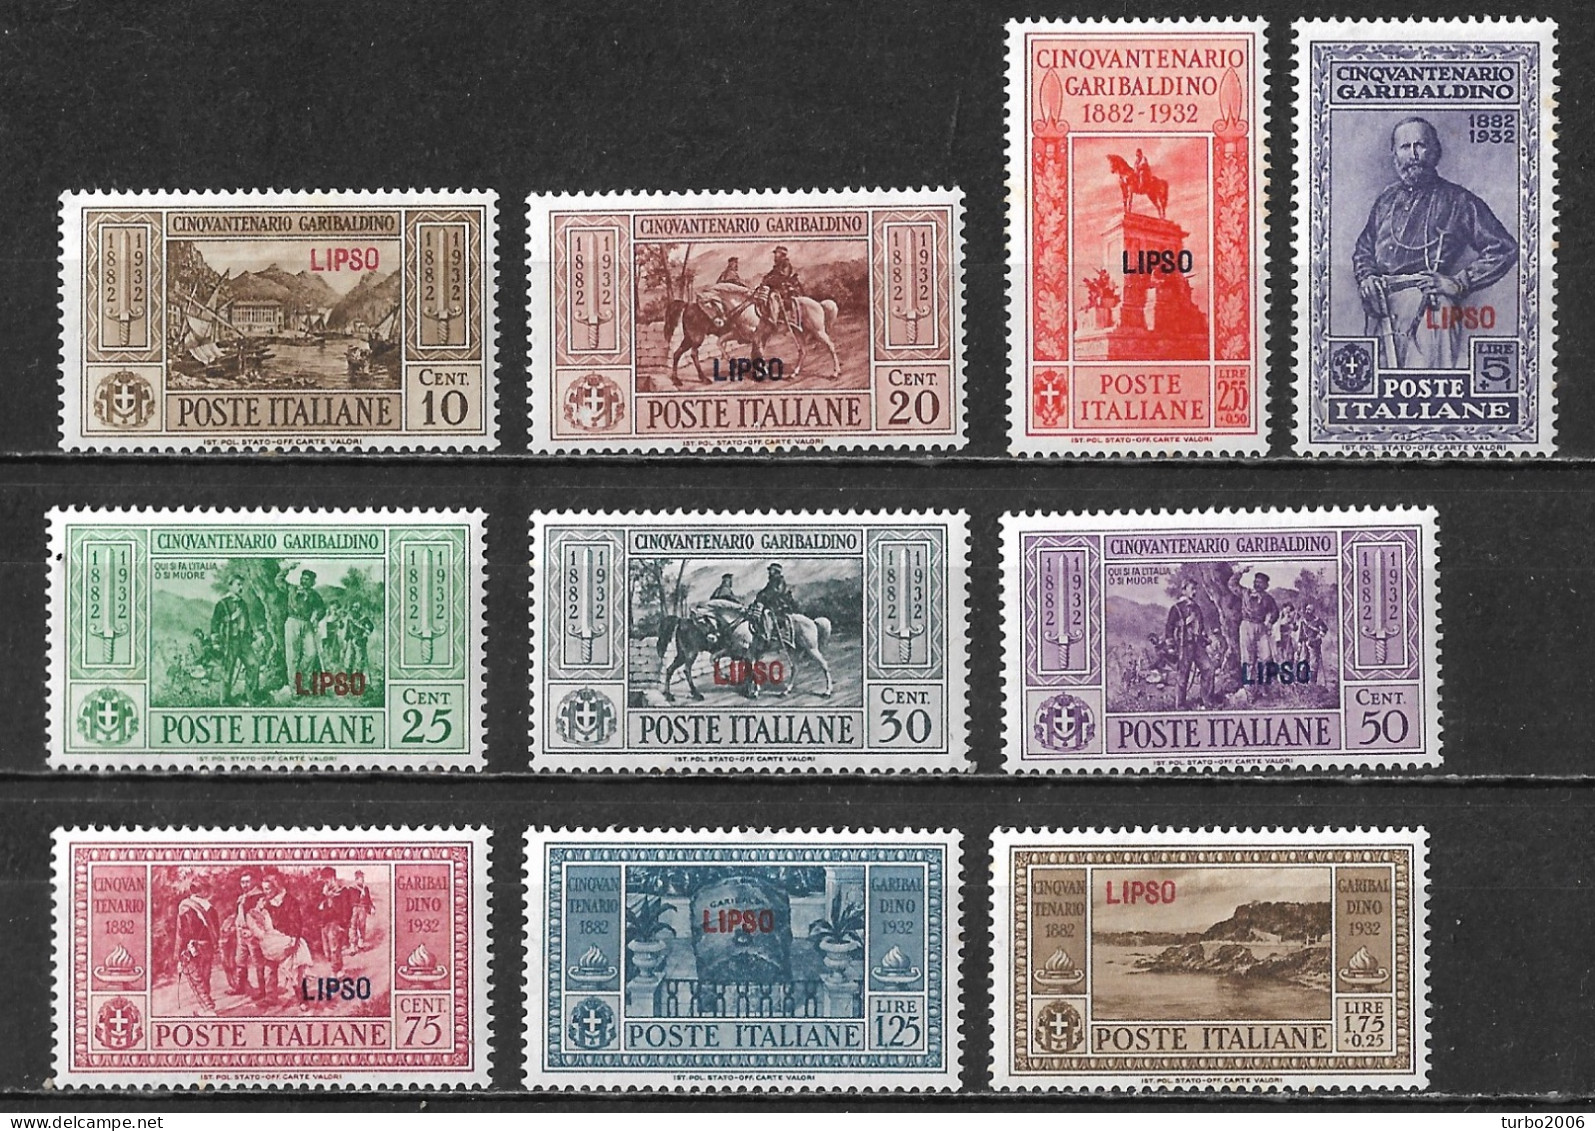 DODECANESE 1932 Stamps Of Italy Garibaldi Set With Overprint LIPSO Complete MH Set Vl. 17 / 26 - Dodekanisos